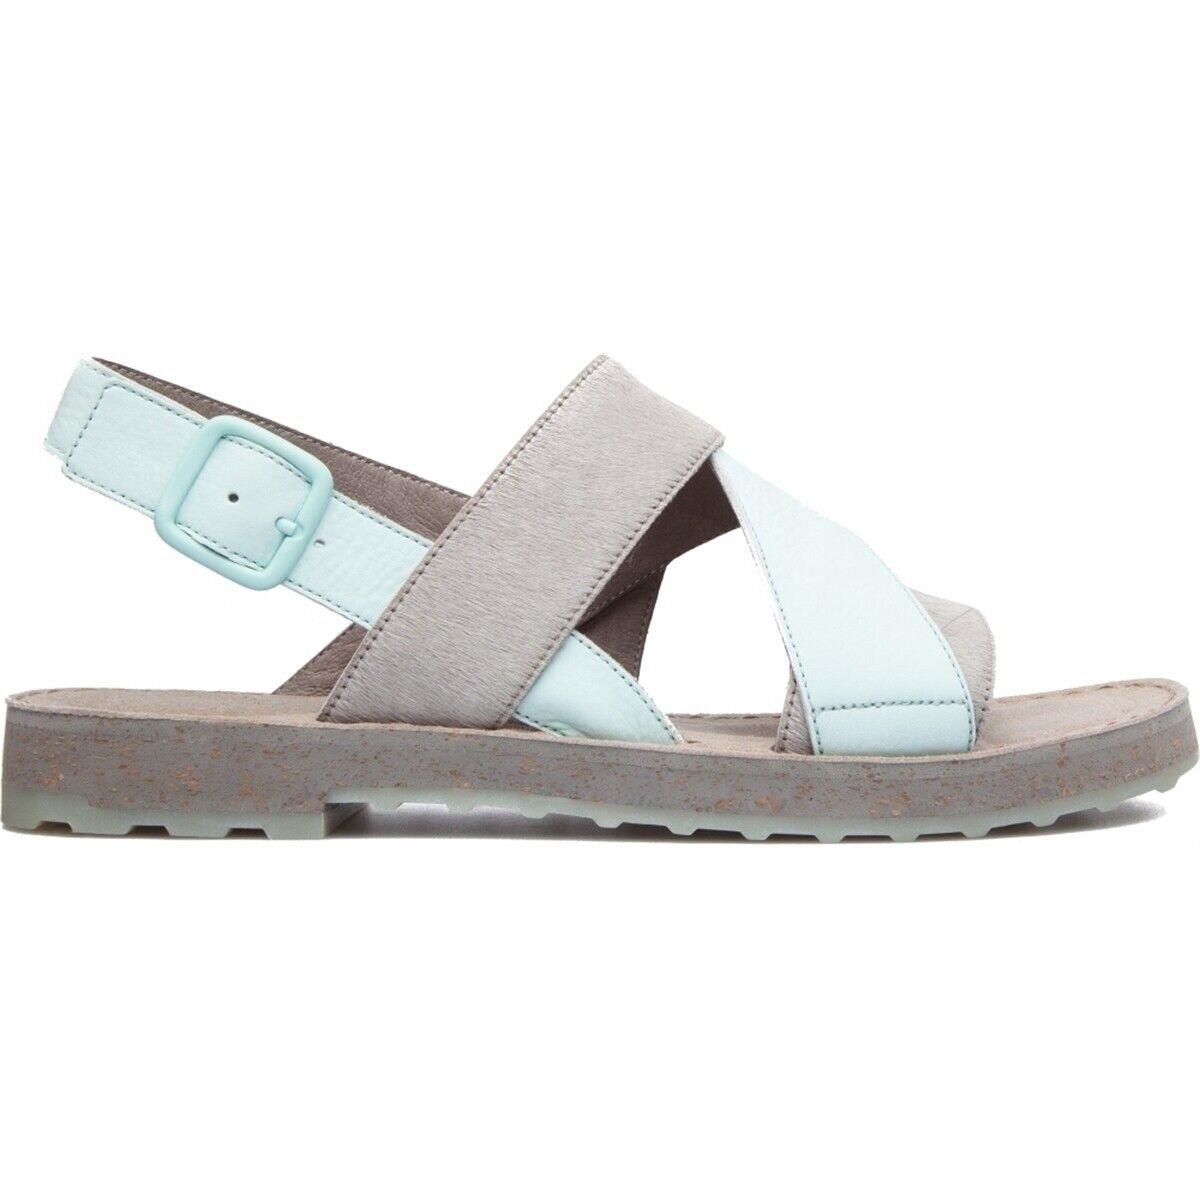 Womens Camper Pimpom Sandals Slingback Two-tone Leather Suede Gray